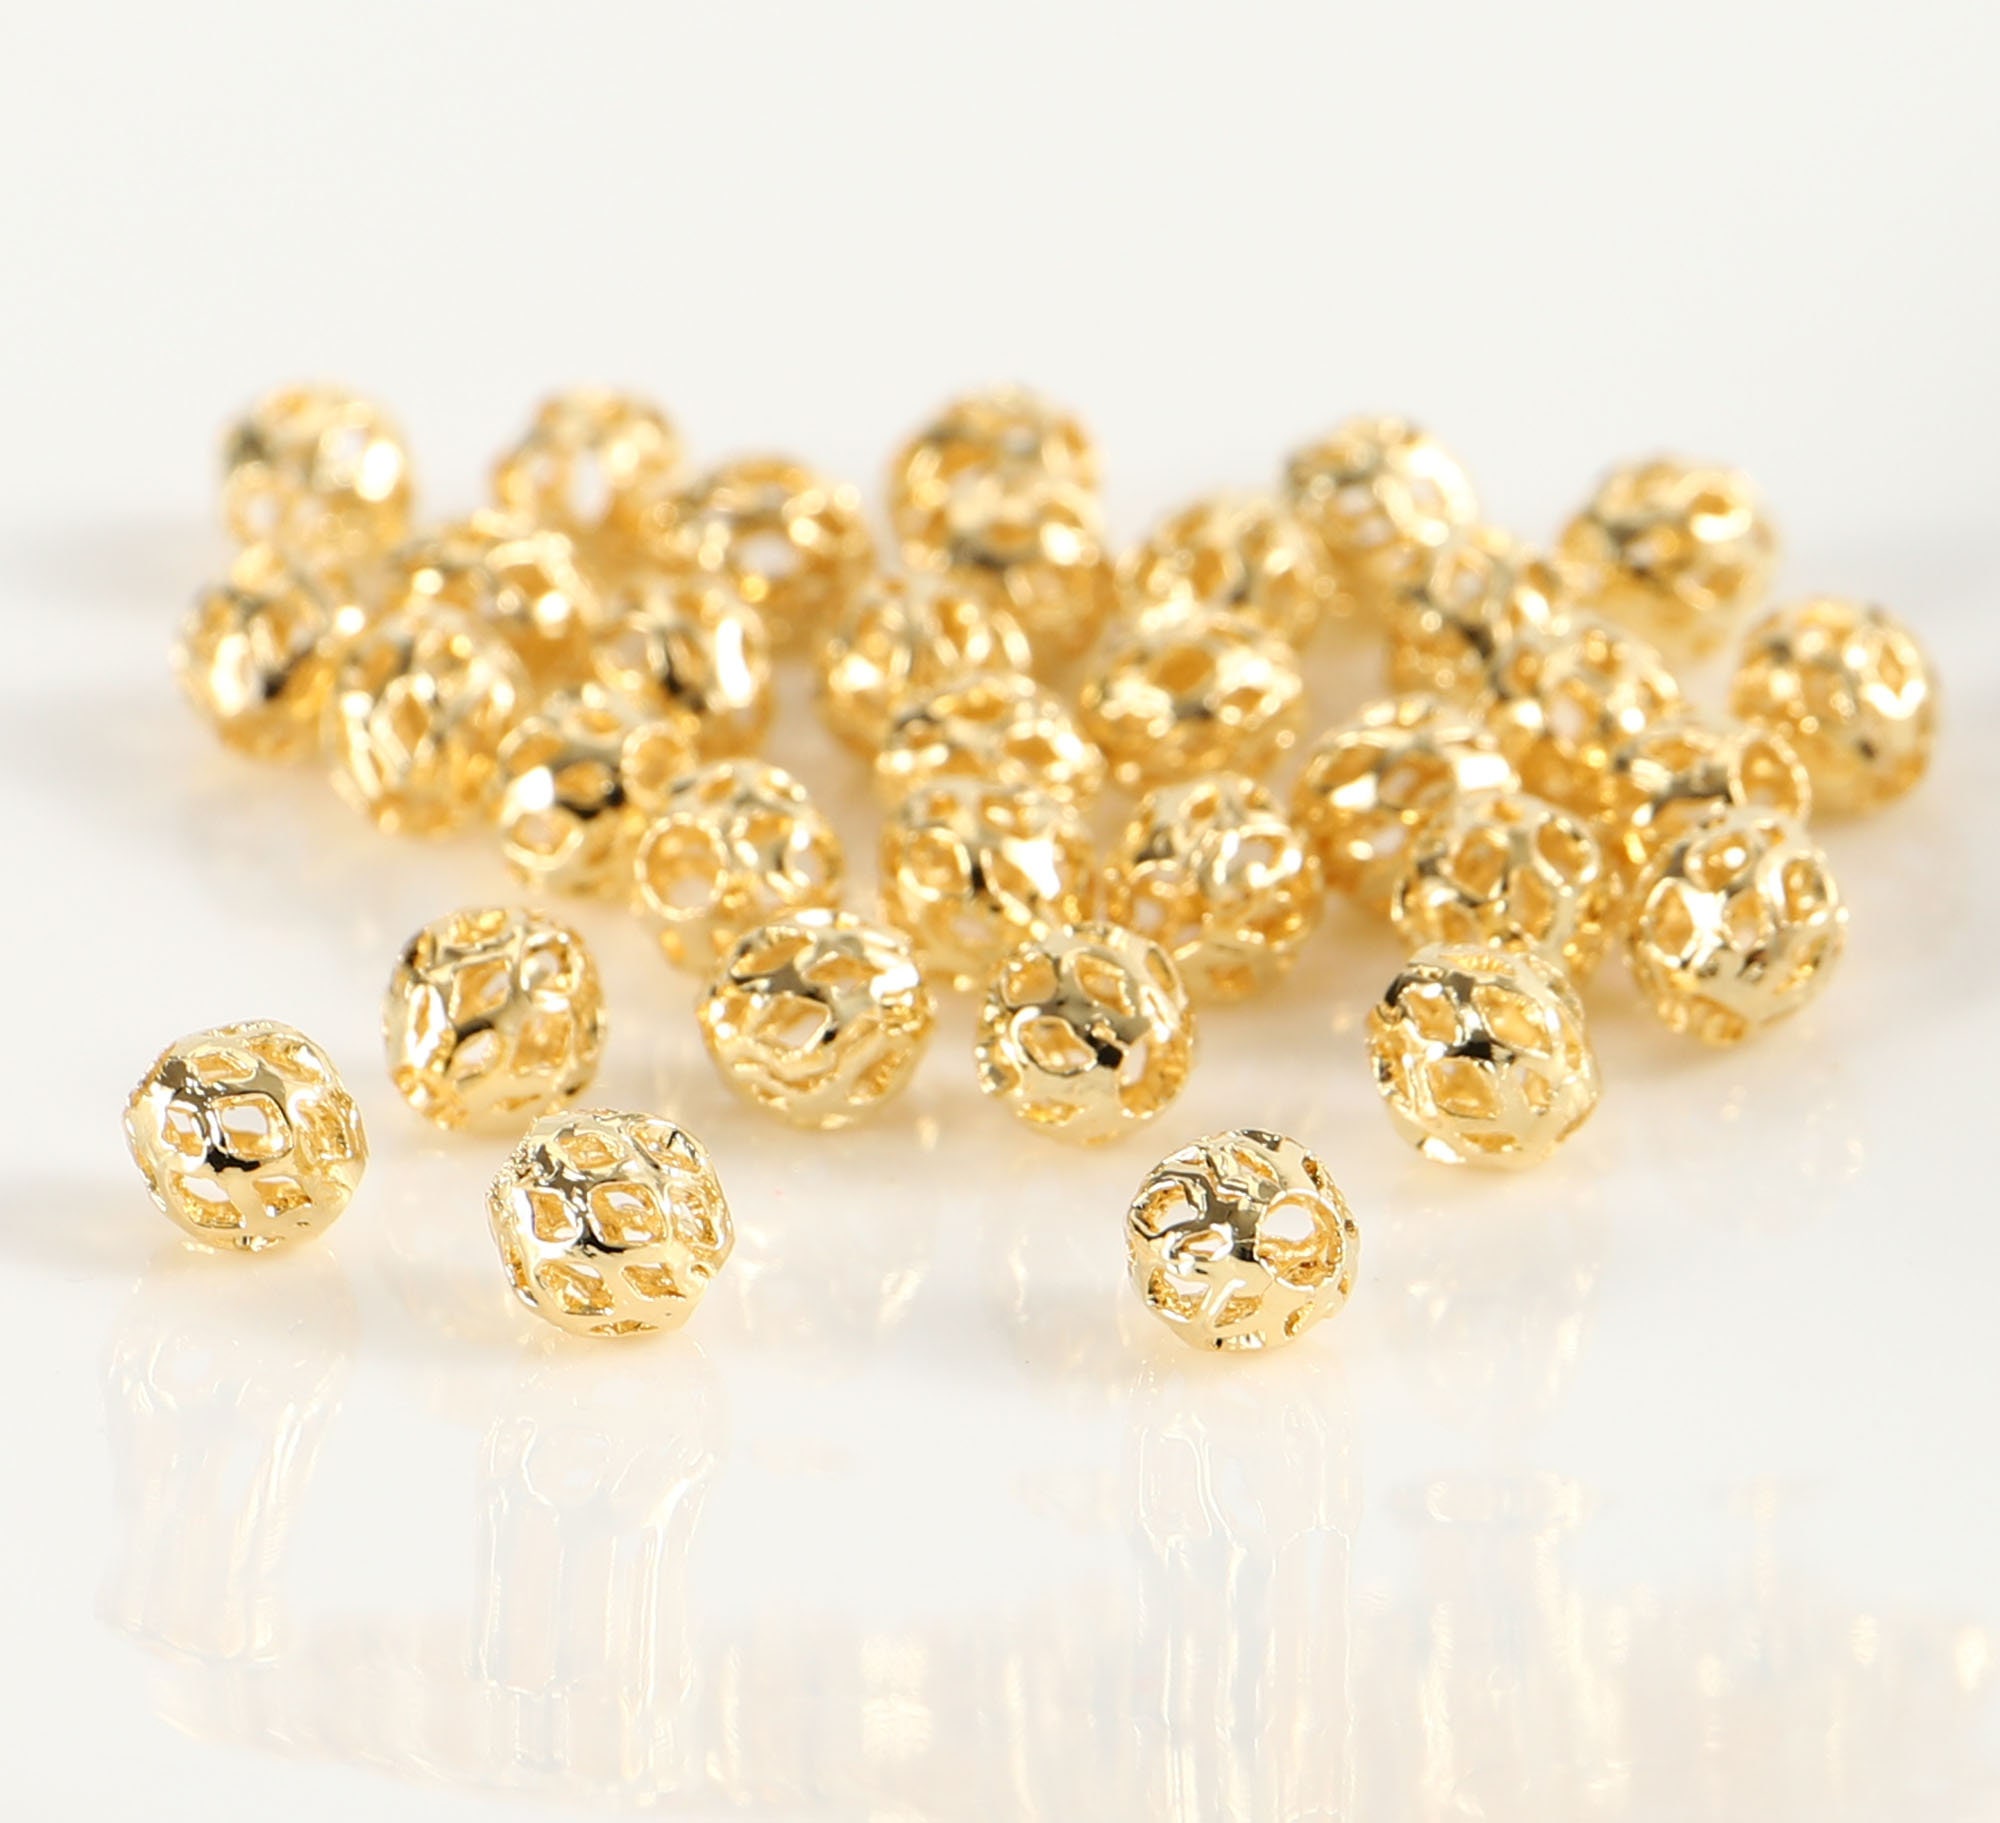 Beautiful Bead 6mm Gold Tone Flower Bead Caps for Jewelry Making (About 500pcs) (6mm, Gold)